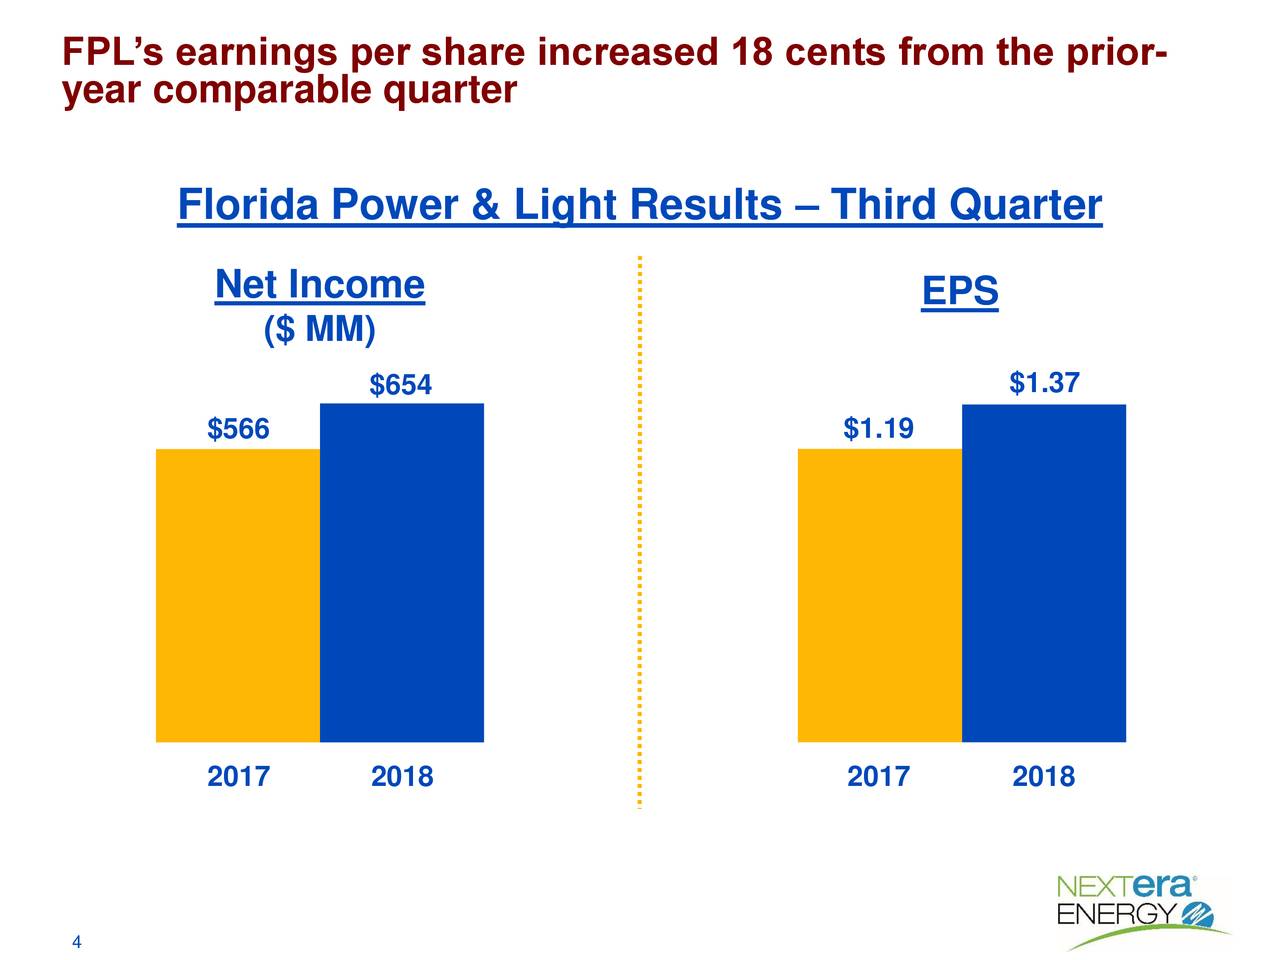 FPL’s earnings per share increased 18 cents from the prior-